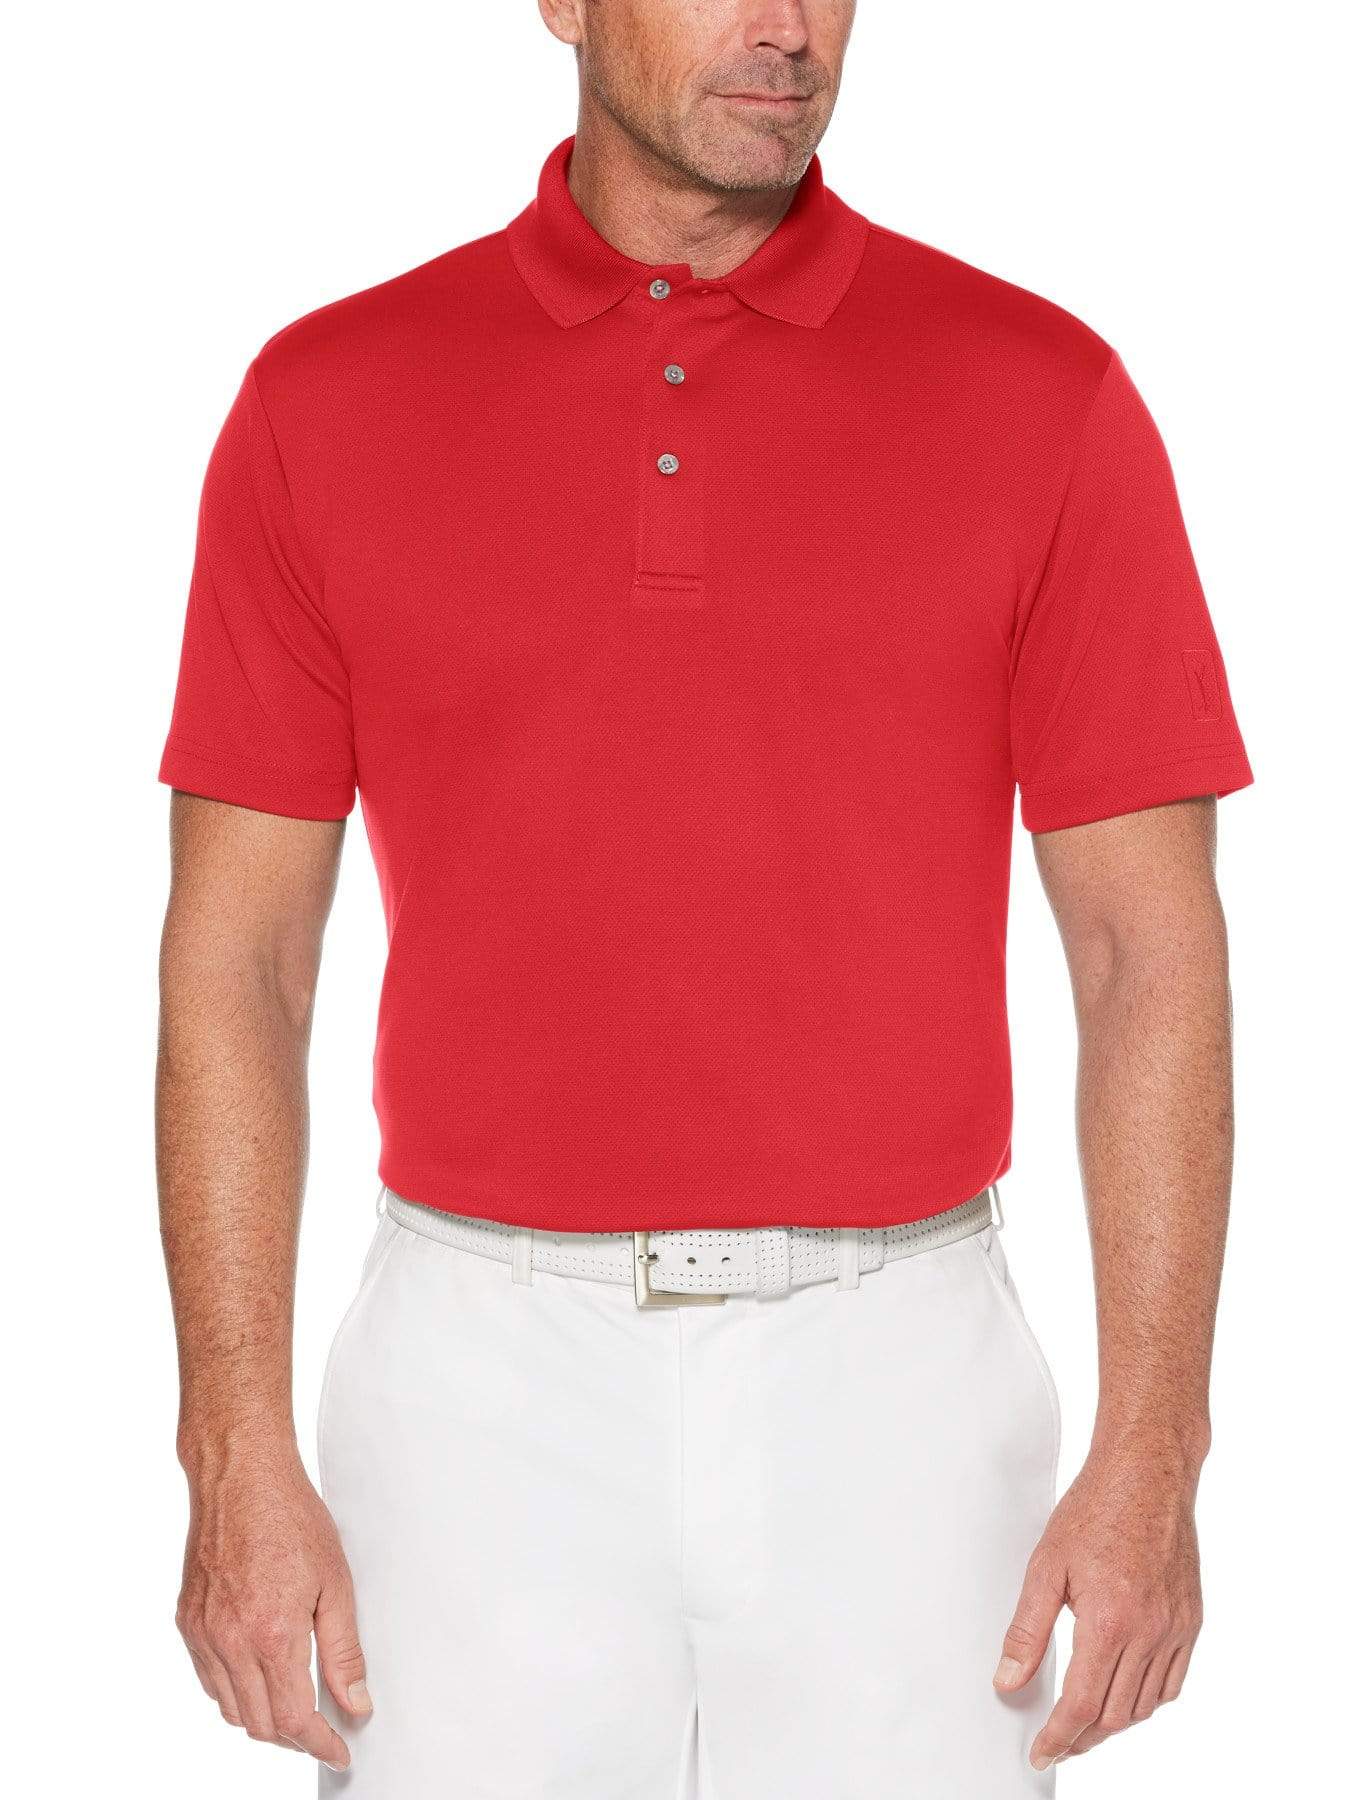 PGA TOUR Apparel Mens Big & Tall AirFlux™ Solid Mesh Polo Shirt, Size 4XLT, Chili Pepper Red, 100% Polyester | Golf Apparel Shop